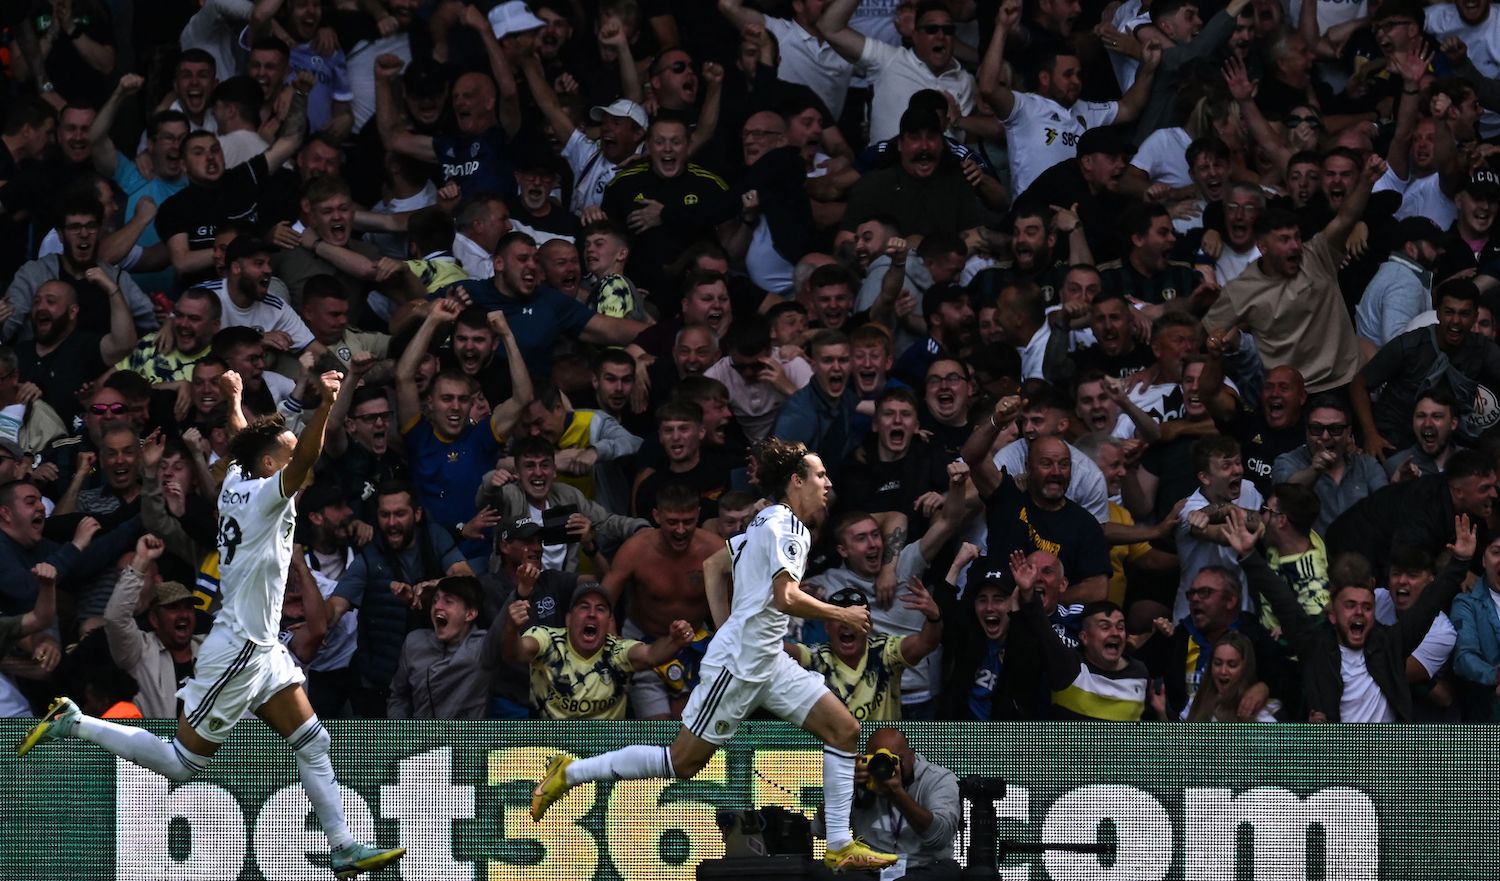 Leeds United's US midfielder Brenden Aaronson (R) celebrates after scoring his team first goal during the English Premier League football match between Leeds United and Chelsea at Elland Road in Leeds, northern England, on August 21, 2022. - RESTRICTED TO EDITORIAL USE. No use with unauthorized audio, video, data, fixture lists, club/league logos or 'live' services. Online in-match use limited to 120 images. An additional 40 images may be used in extra time. No video emulation. Social media in-match use limited to 120 images. An additional 40 images may be used in extra time. No use in betting publications, games or single club/league/player publications. (Photo by Paul ELLIS / AFP) / RESTRICTED TO EDITORIAL USE. No use with unauthorized audio, video, data, fixture lists, club/league logos or 'live' services. Online in-match use limited to 120 images. An additional 40 images may be used in extra time. No video emulation. Social media in-match use limited to 120 images. An additional 40 images may be used in extra time. No use in betting publications, games or single club/league/player publications. / RESTRICTED TO EDITORIAL USE. No use with unauthorized audio, video, data, fixture lists, club/league logos or 'live' services. Online in-match use limited to 120 images. An additional 40 images may be used in extra time. No video emulation. Social media in-match use limited to 120 images. An additional 40 images may be used in extra time. No use in betting publications, games or single club/league/player publications. (Photo by PAUL ELLIS/AFP via Getty Images)